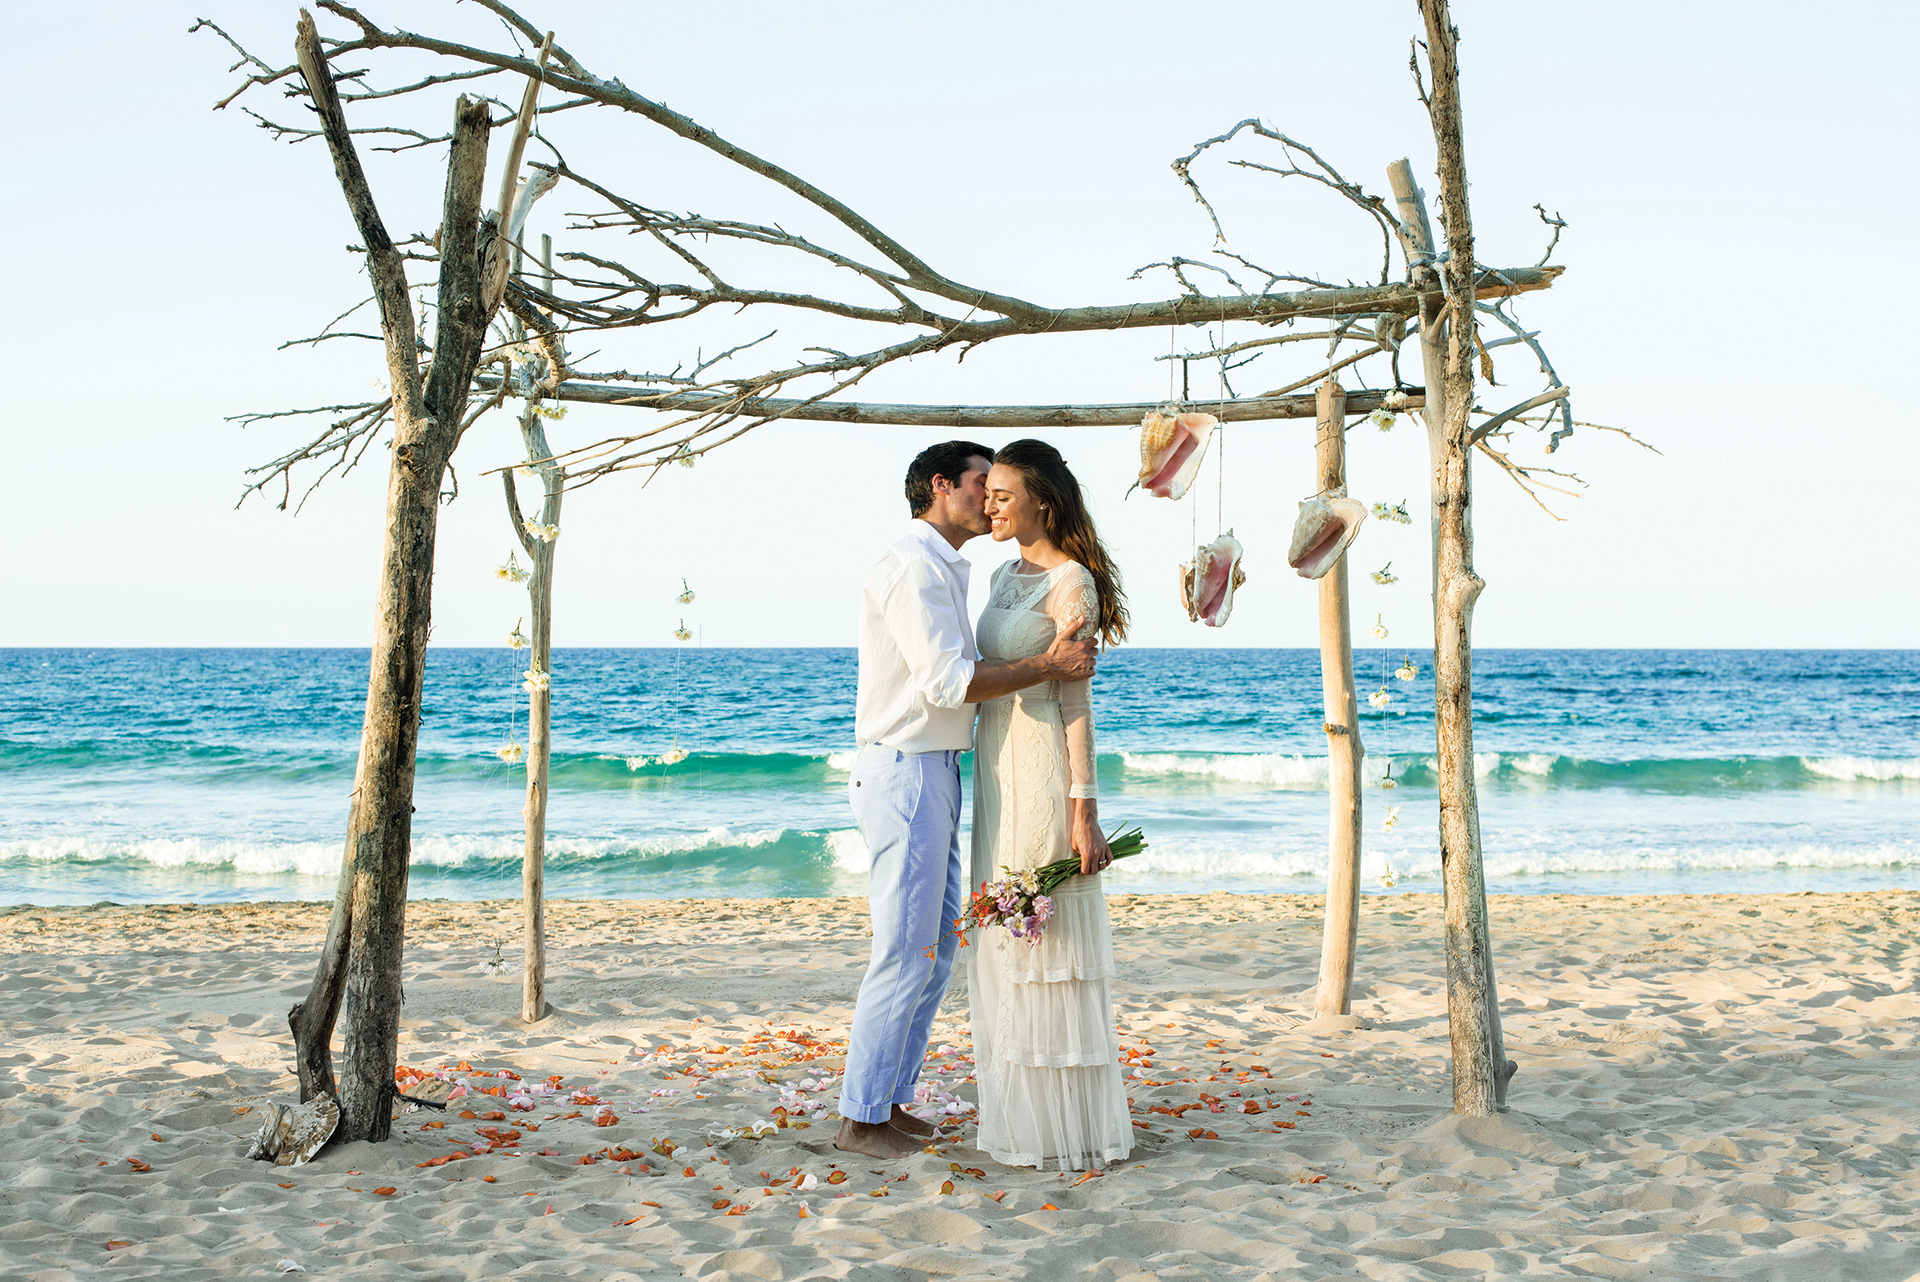 Natural wedding settting by the ocean in Excellence Punta Cana